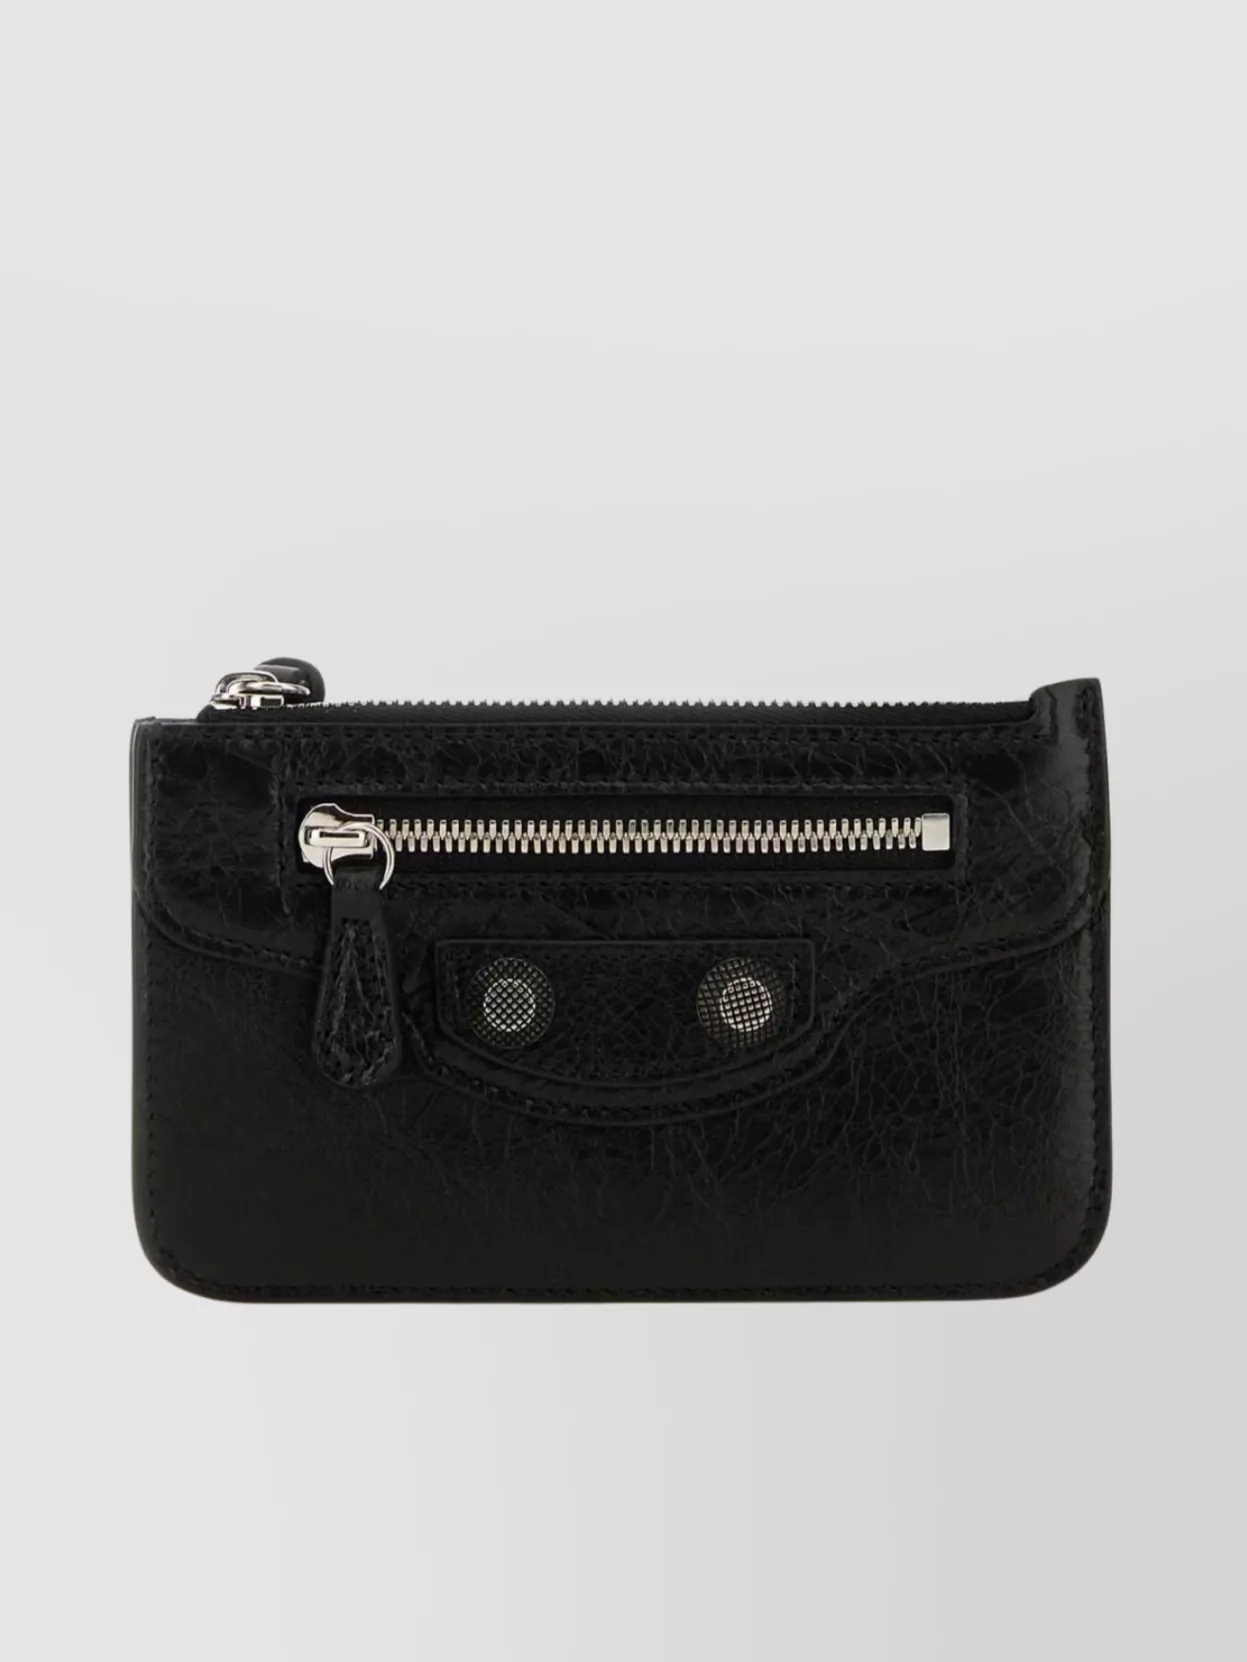 Shop Balenciaga Leather Wallet With Textured Finish And Metal Hardware